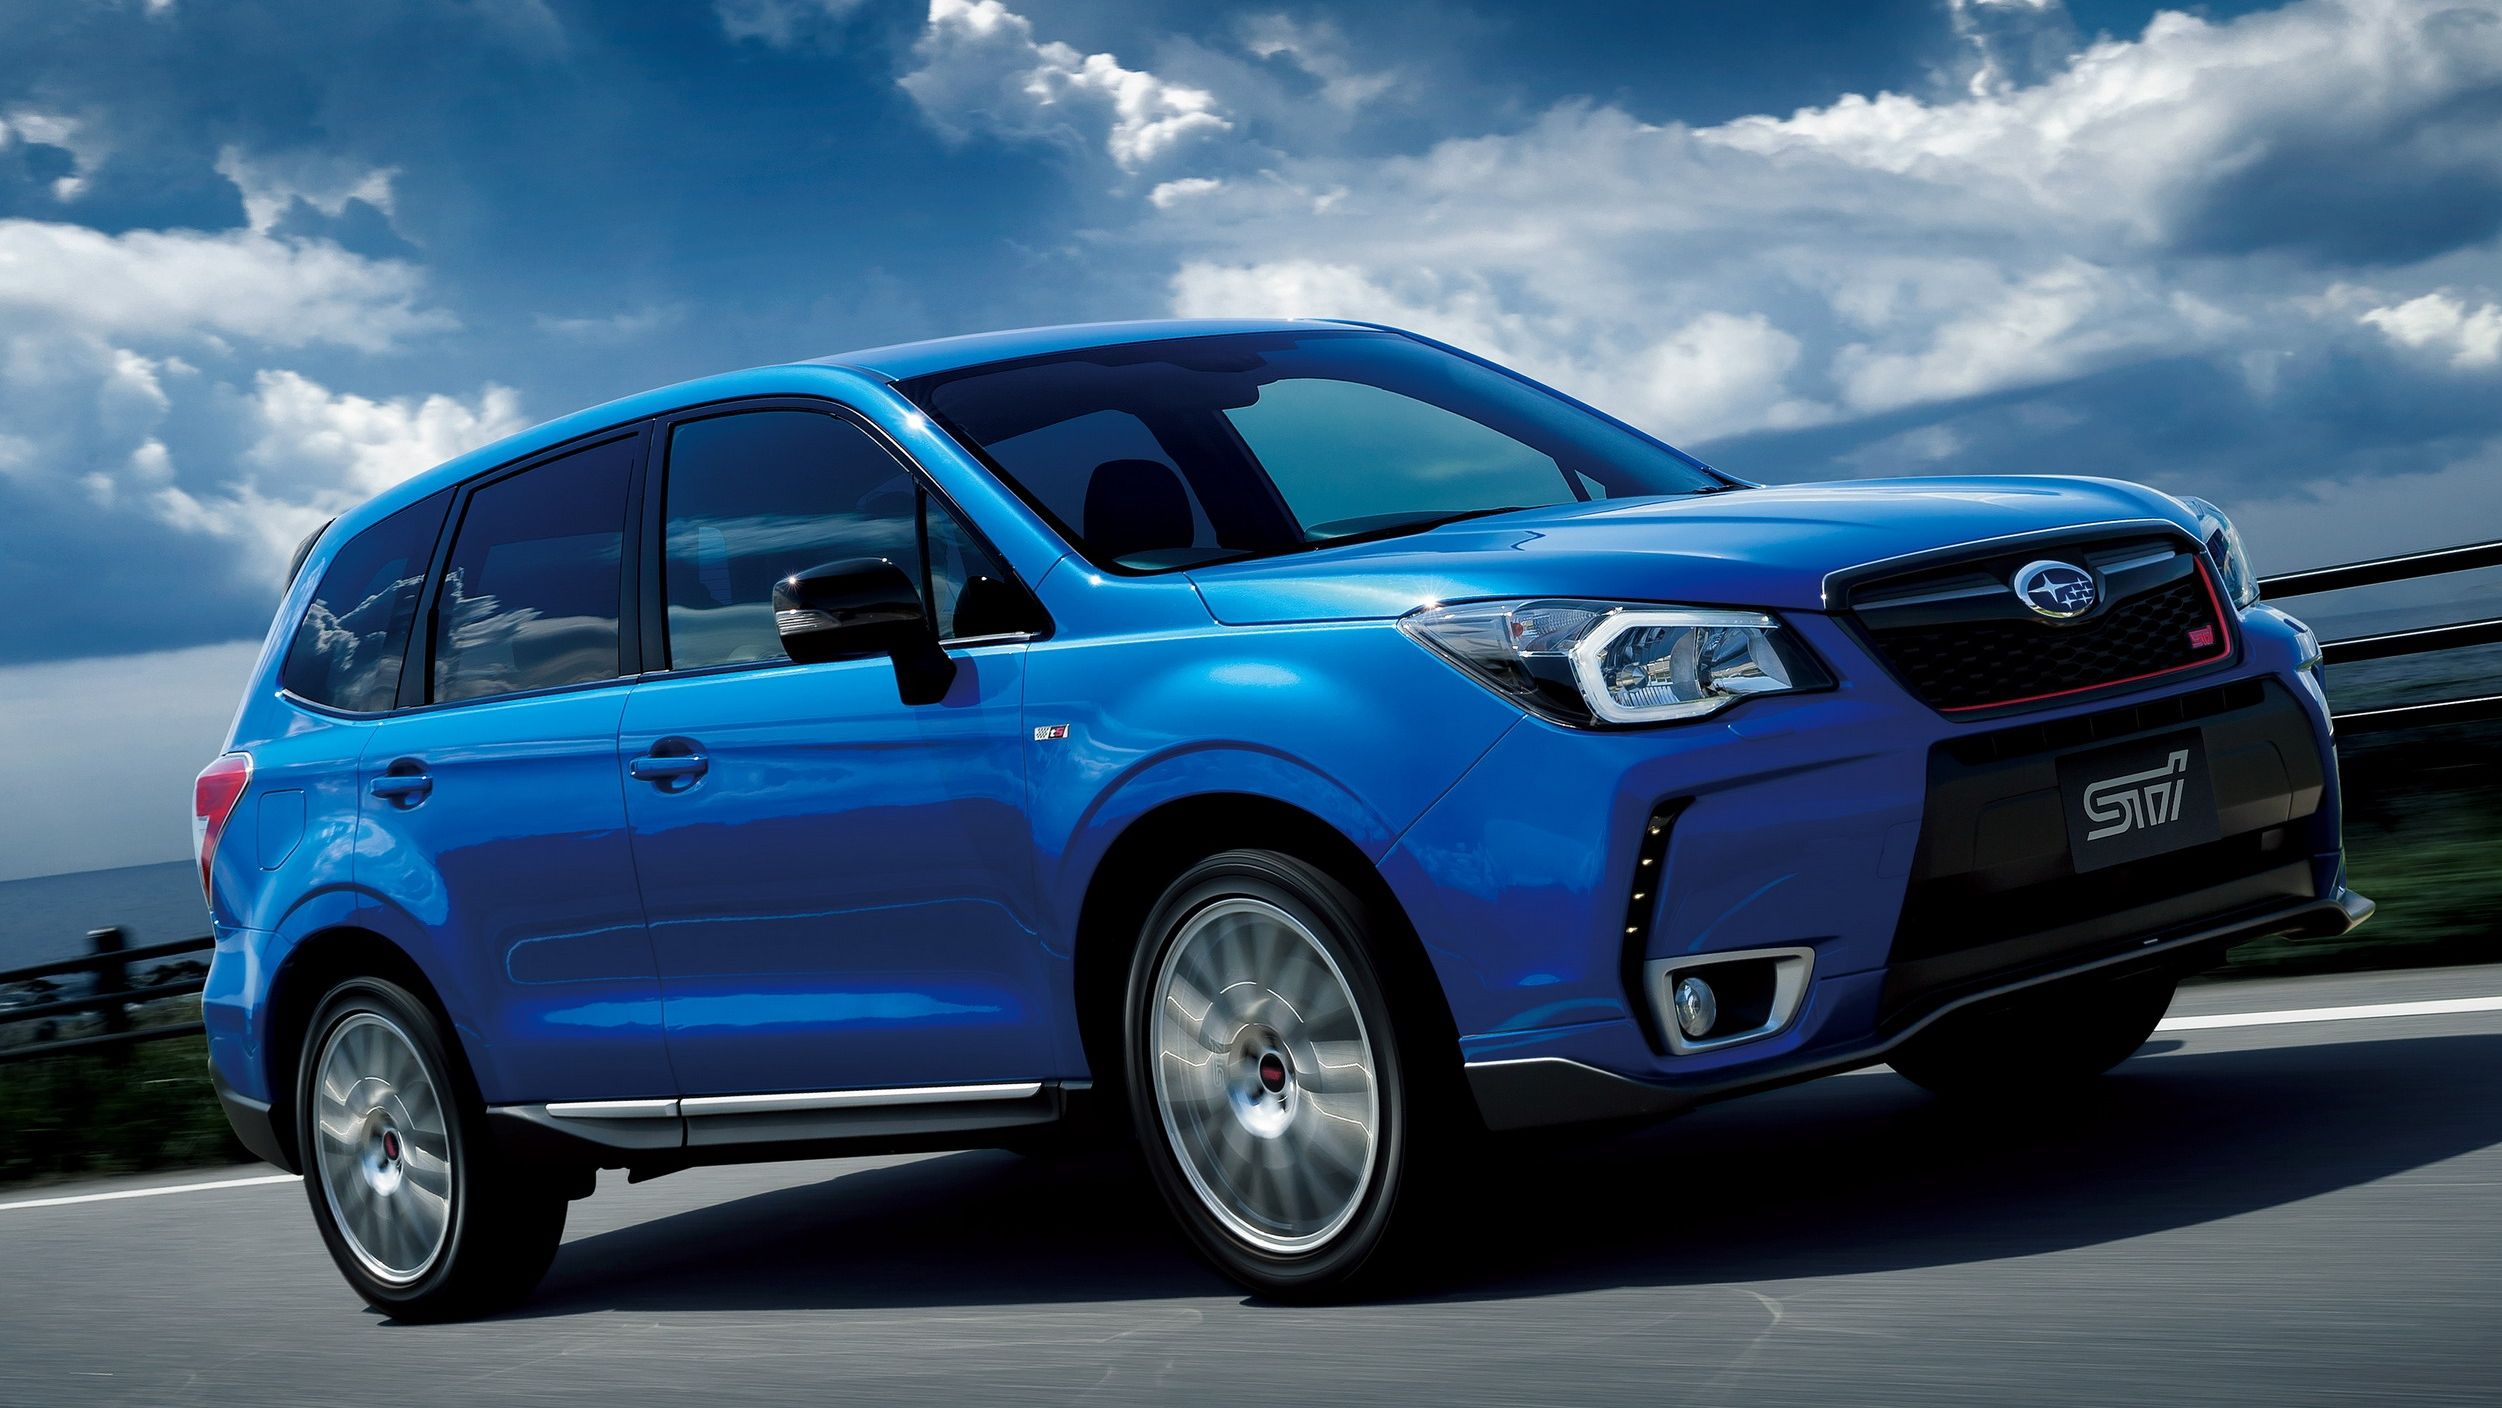 Well, it's not a true STI, but the Forester tS is a pretty cool in-between model. 